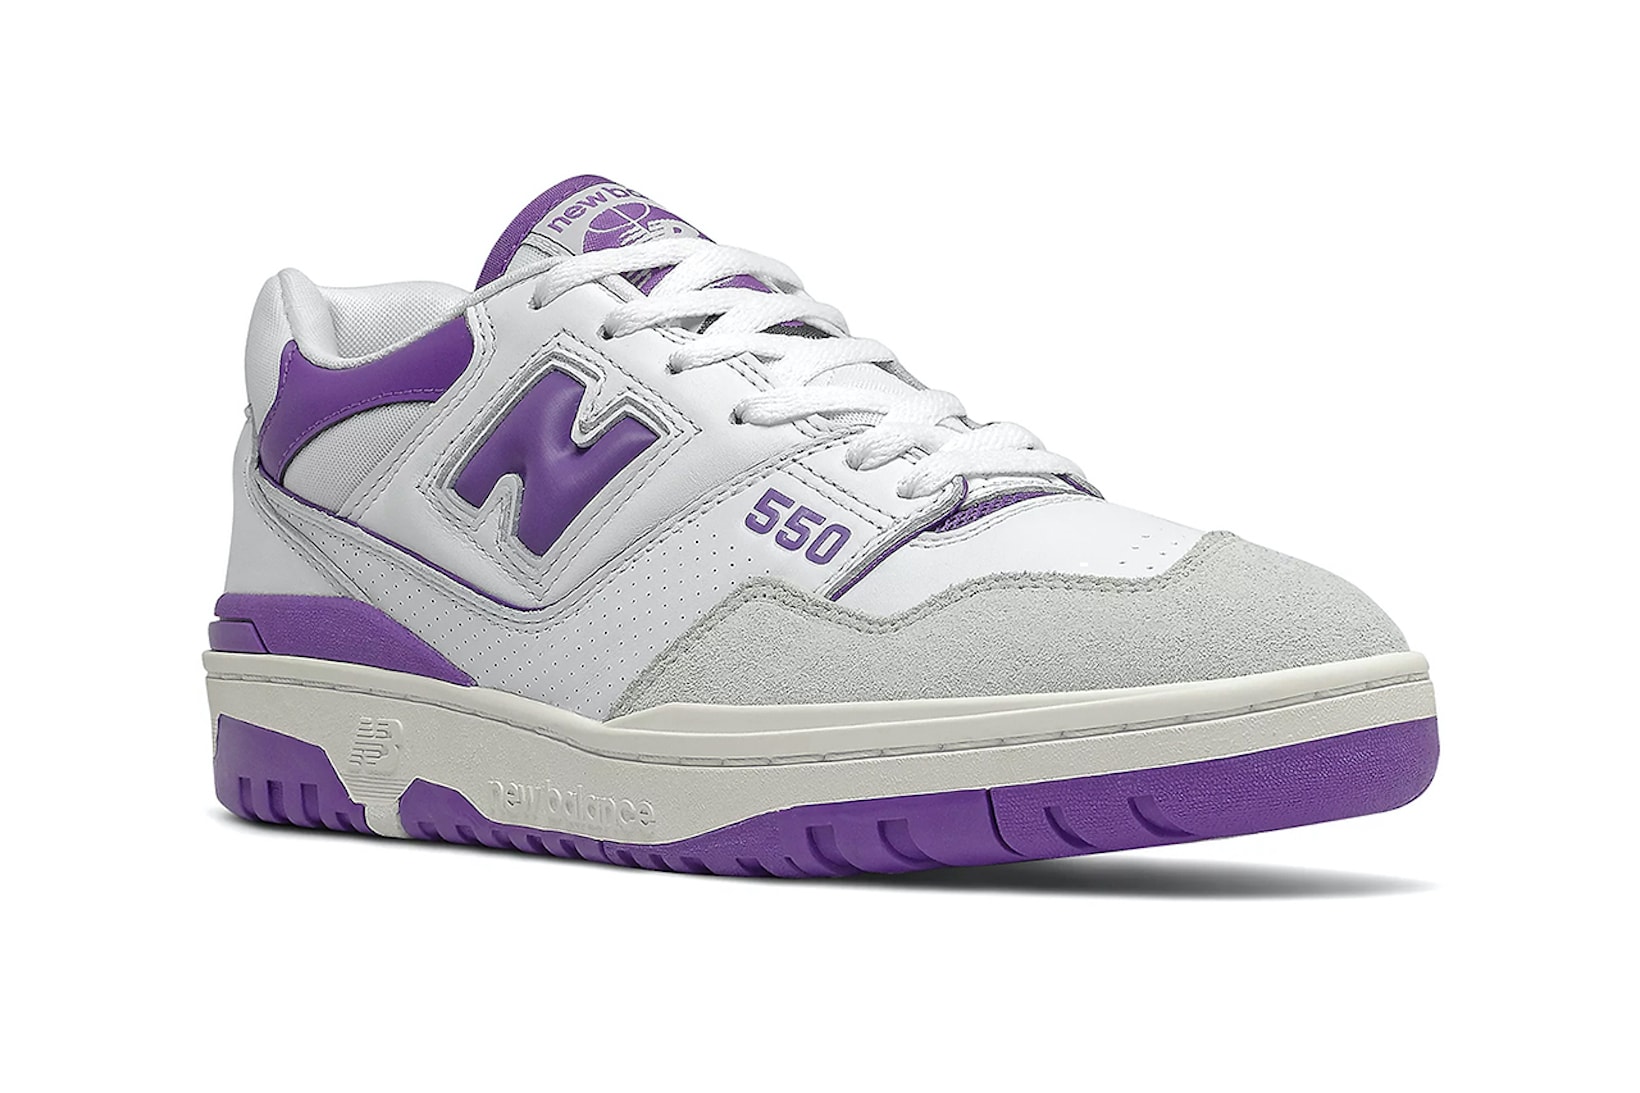 new balance nb 550 purple white colorway sneakers footwear kicks shoes lateral